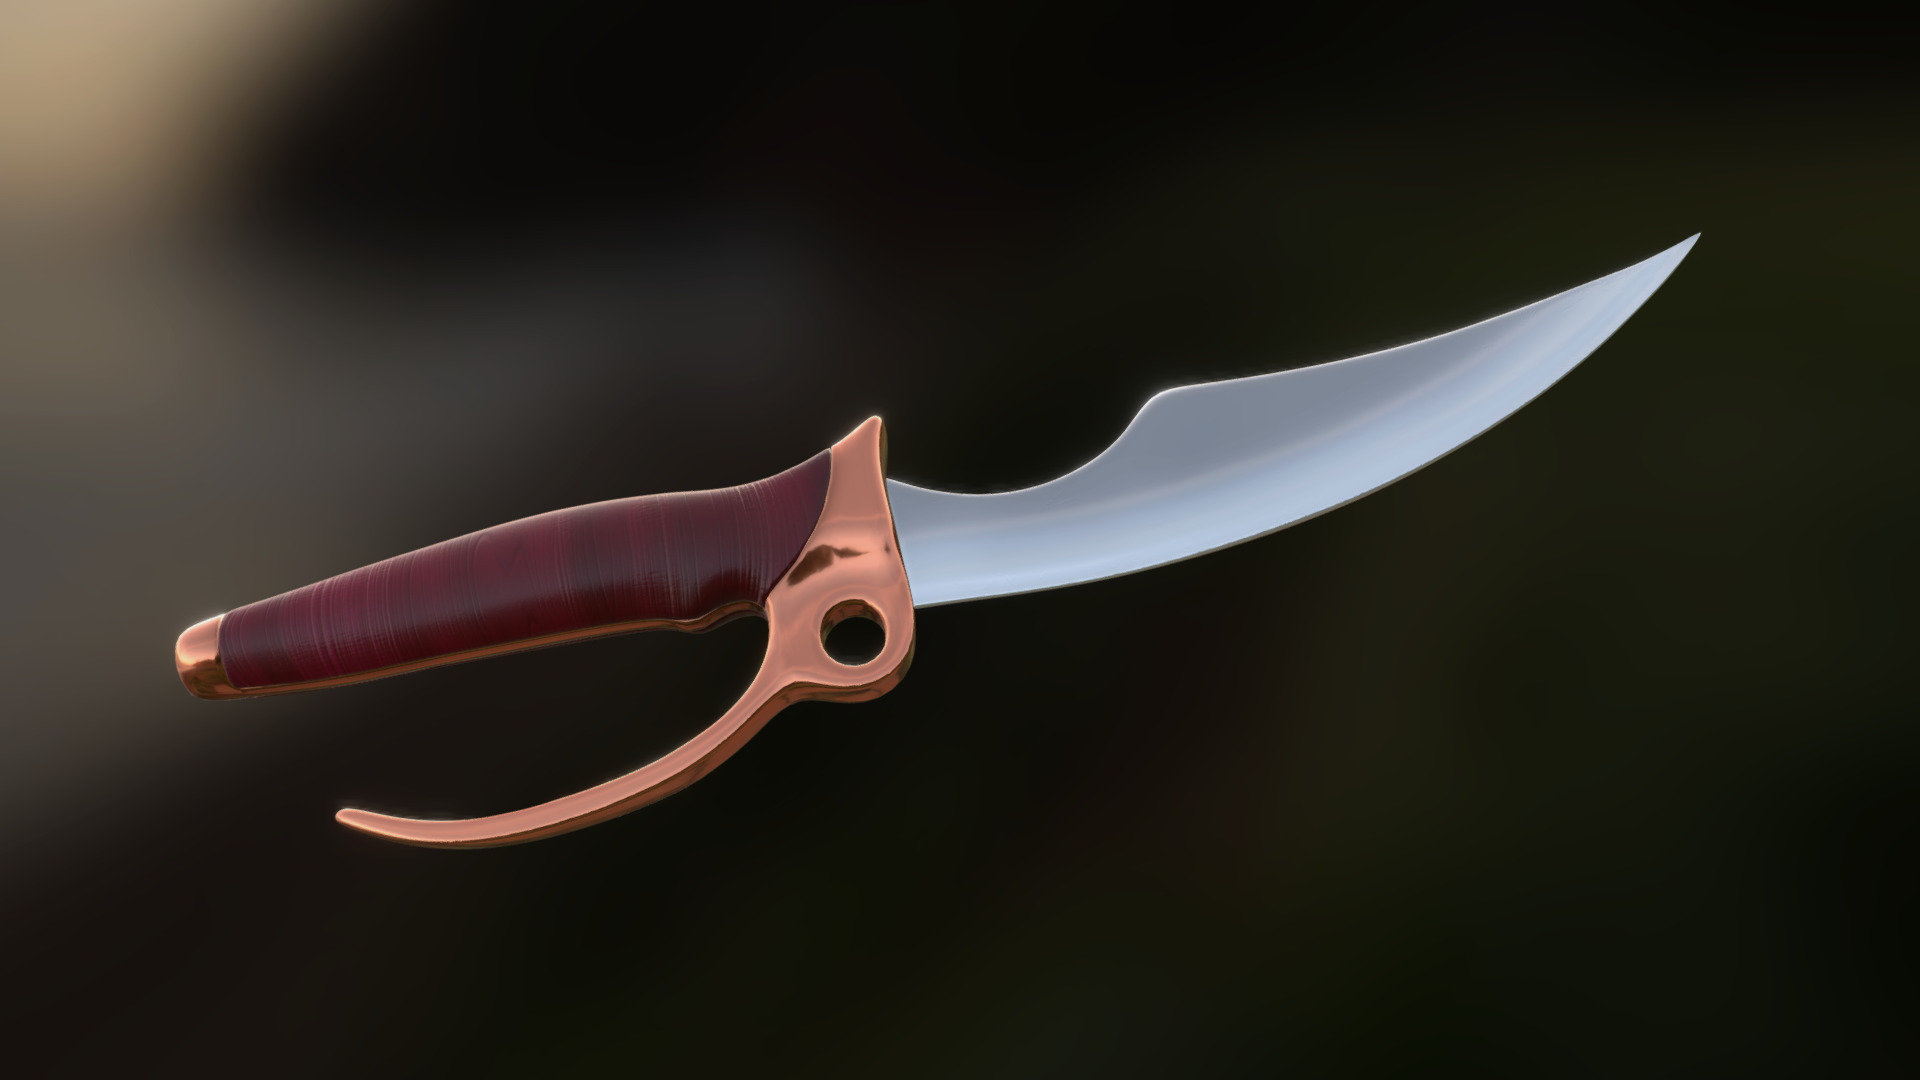 Curved Knife 01